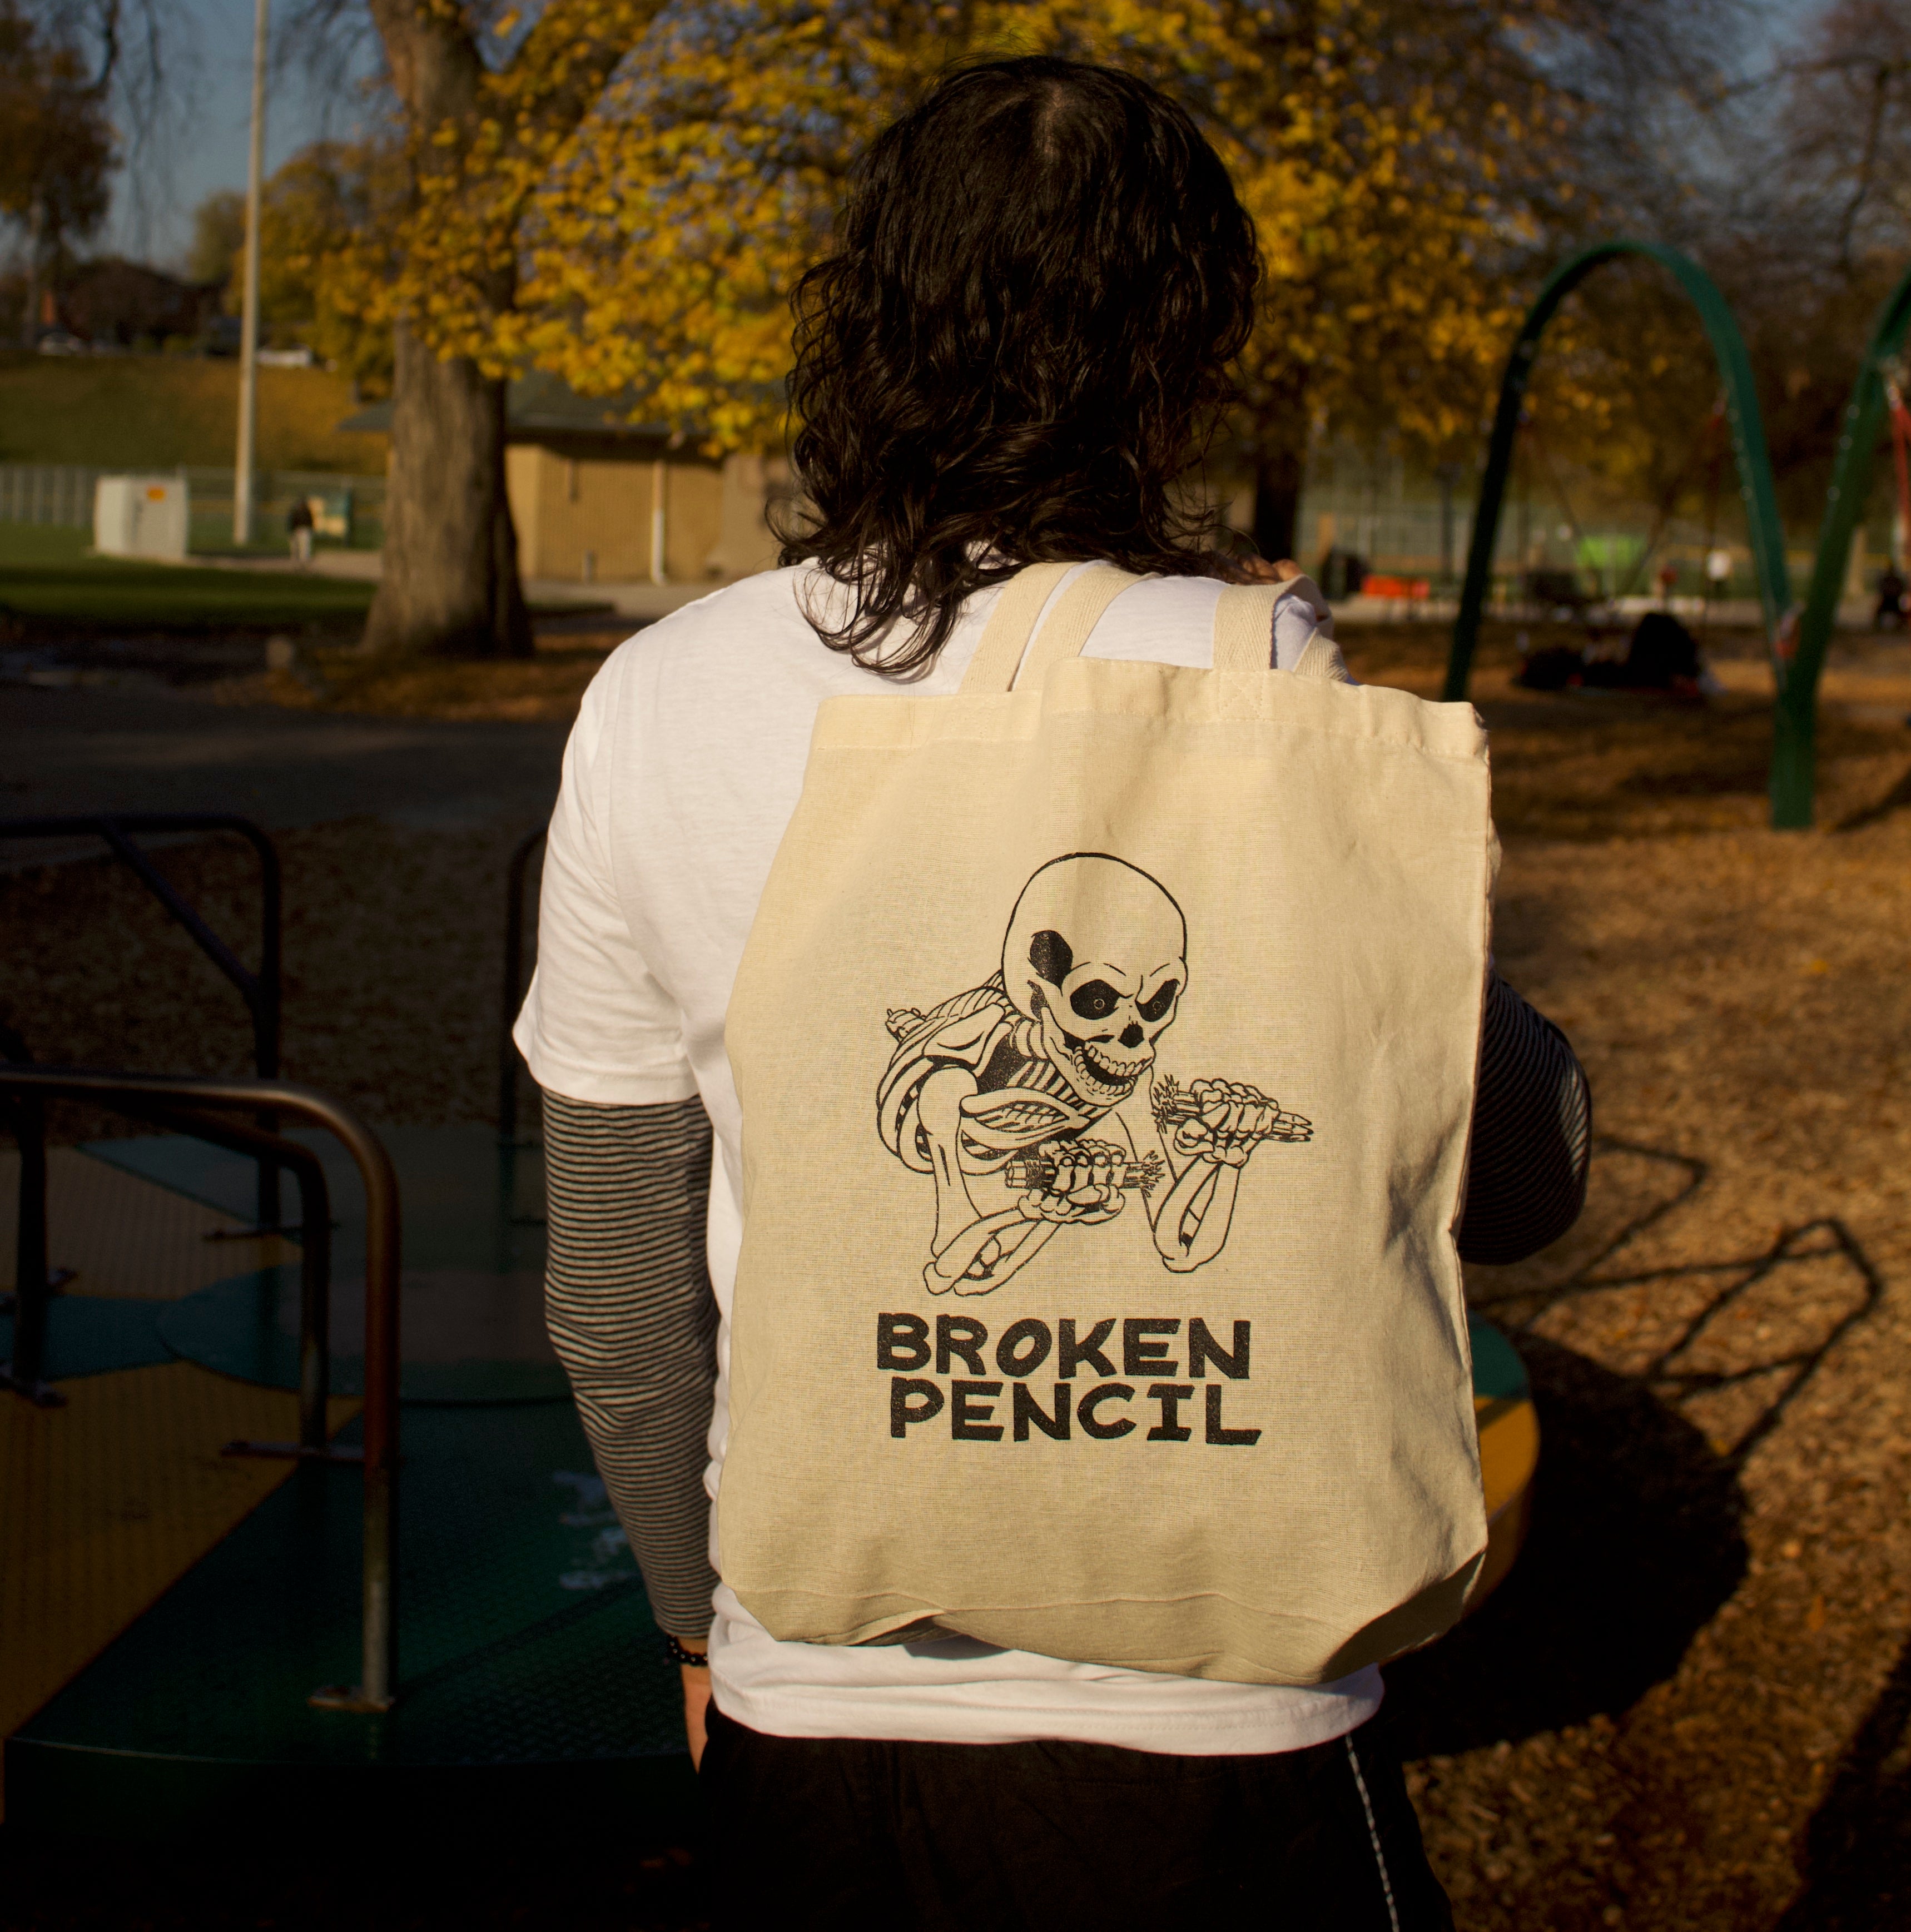 Skull and Zines Tote Bag